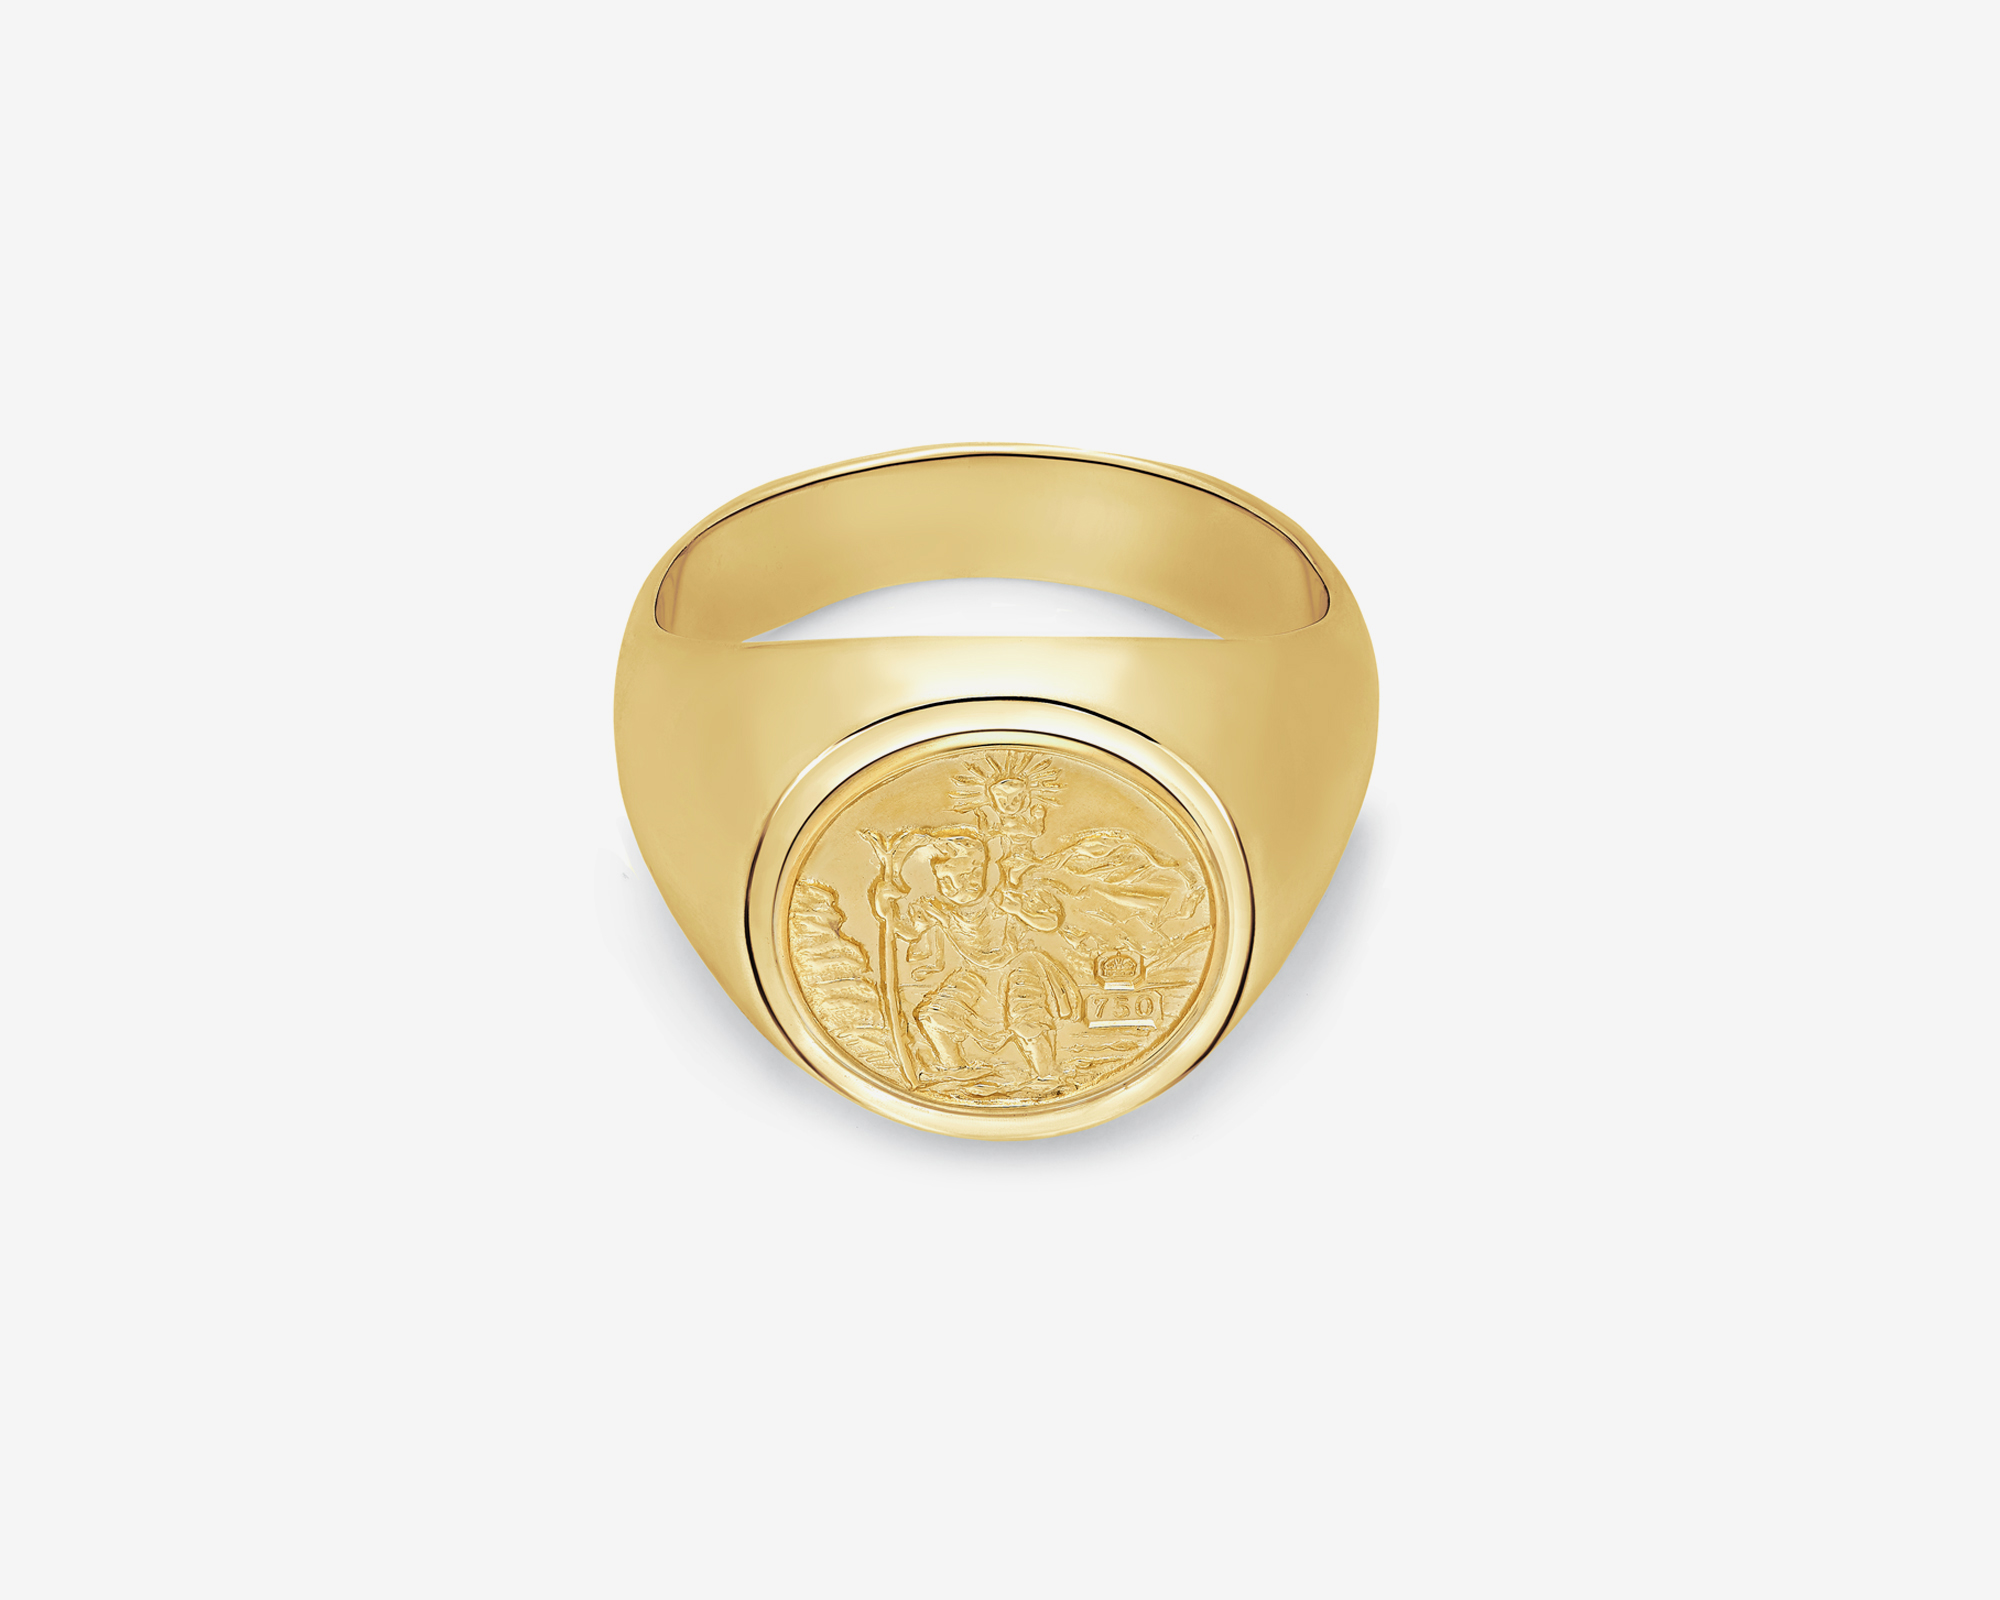 SSSIGRNG – St Christopher Signet Ring – JT Inman Co.